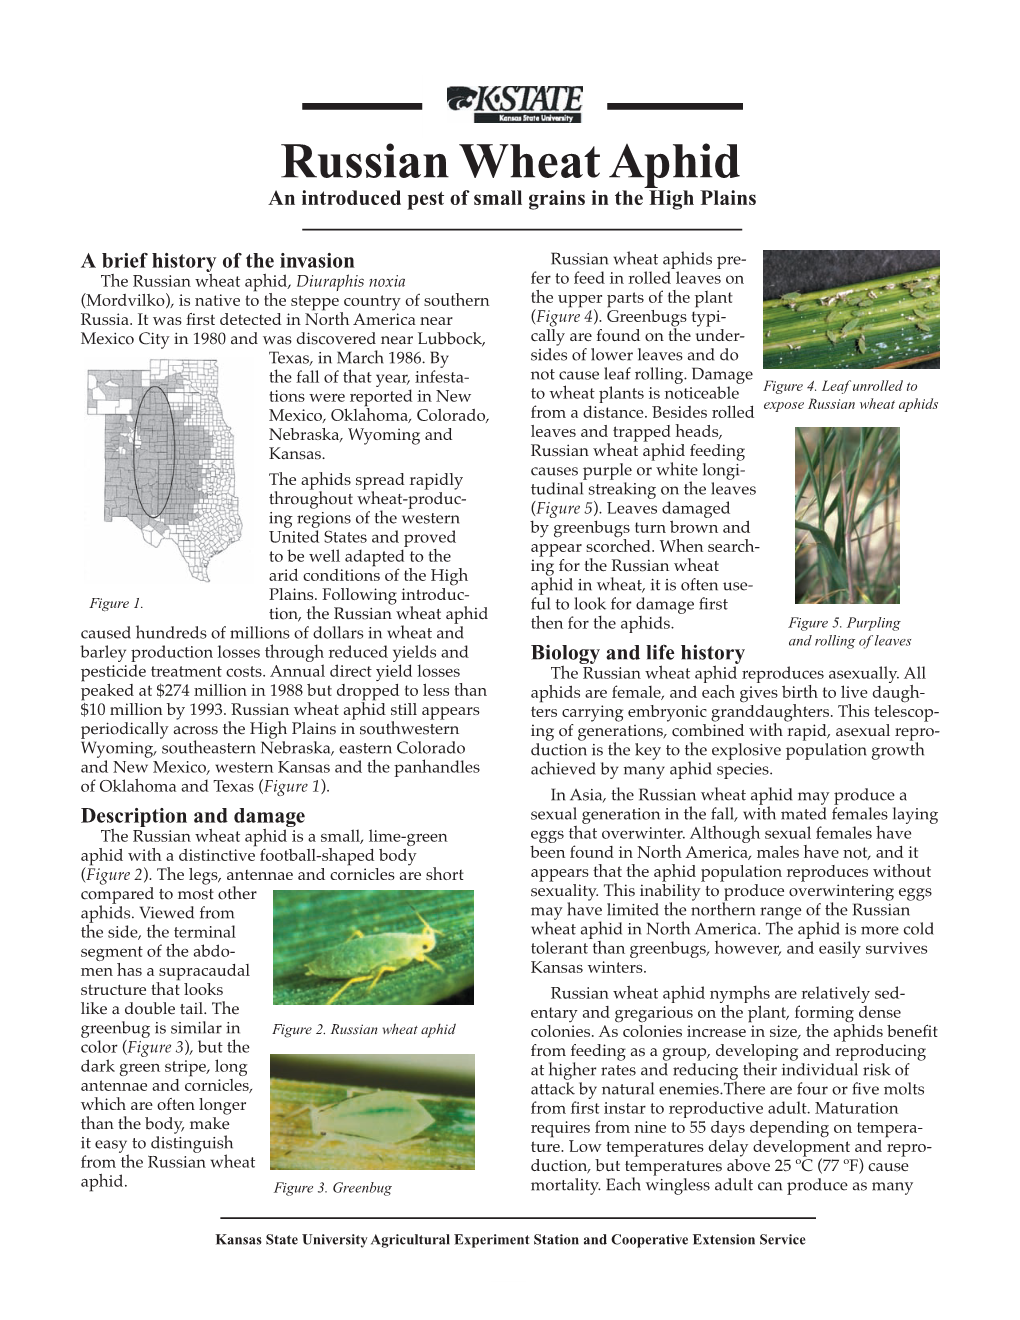 MF2666 Russian Wheat Aphid